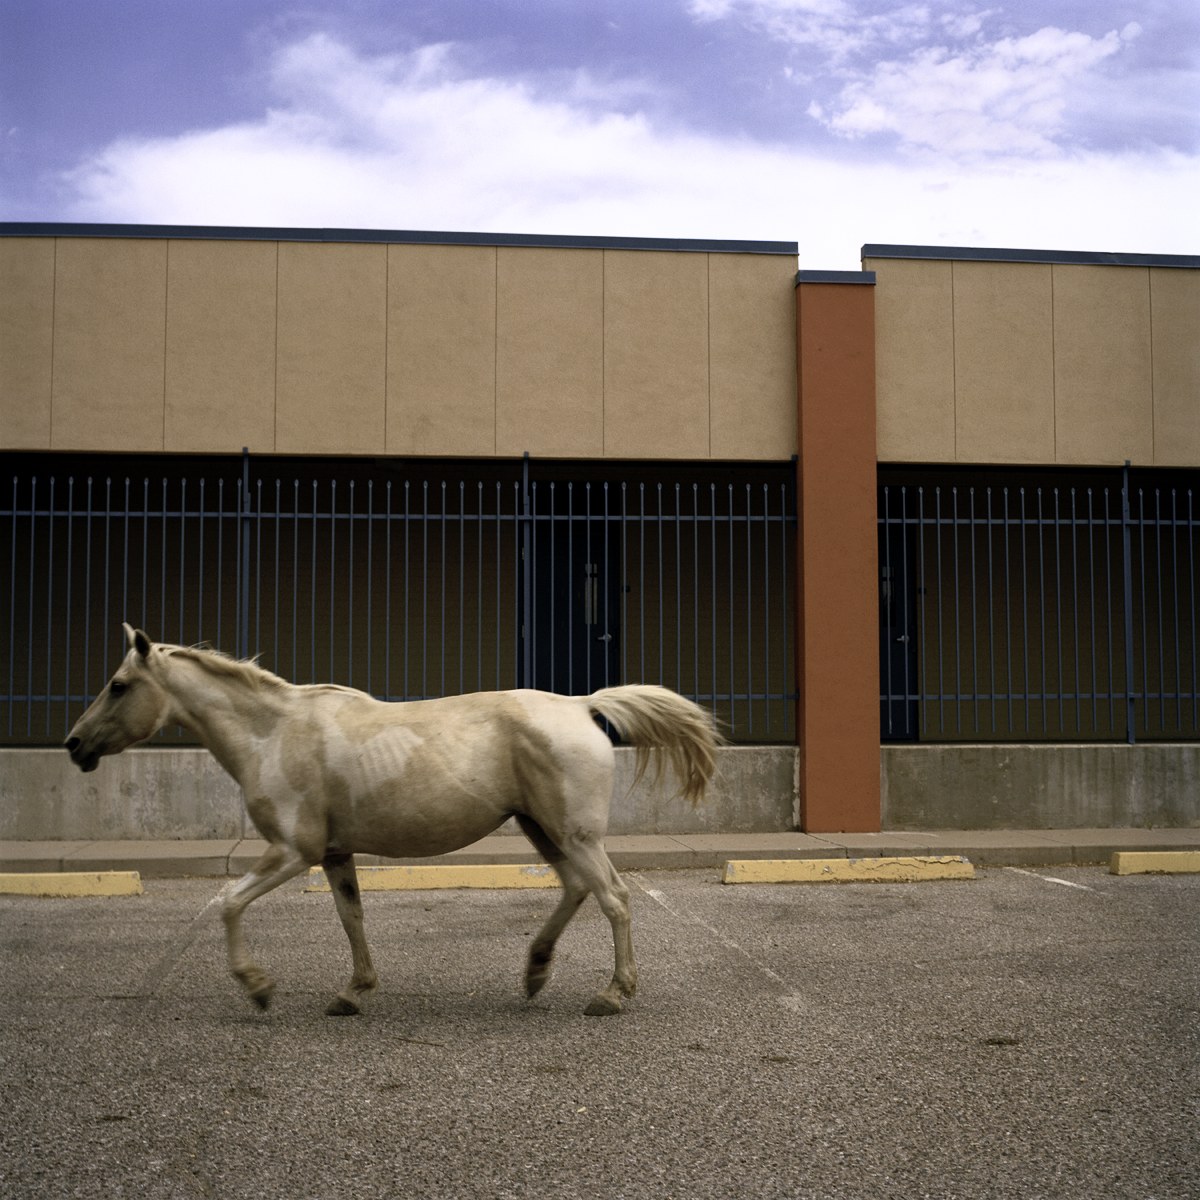 Town of horses, 2012